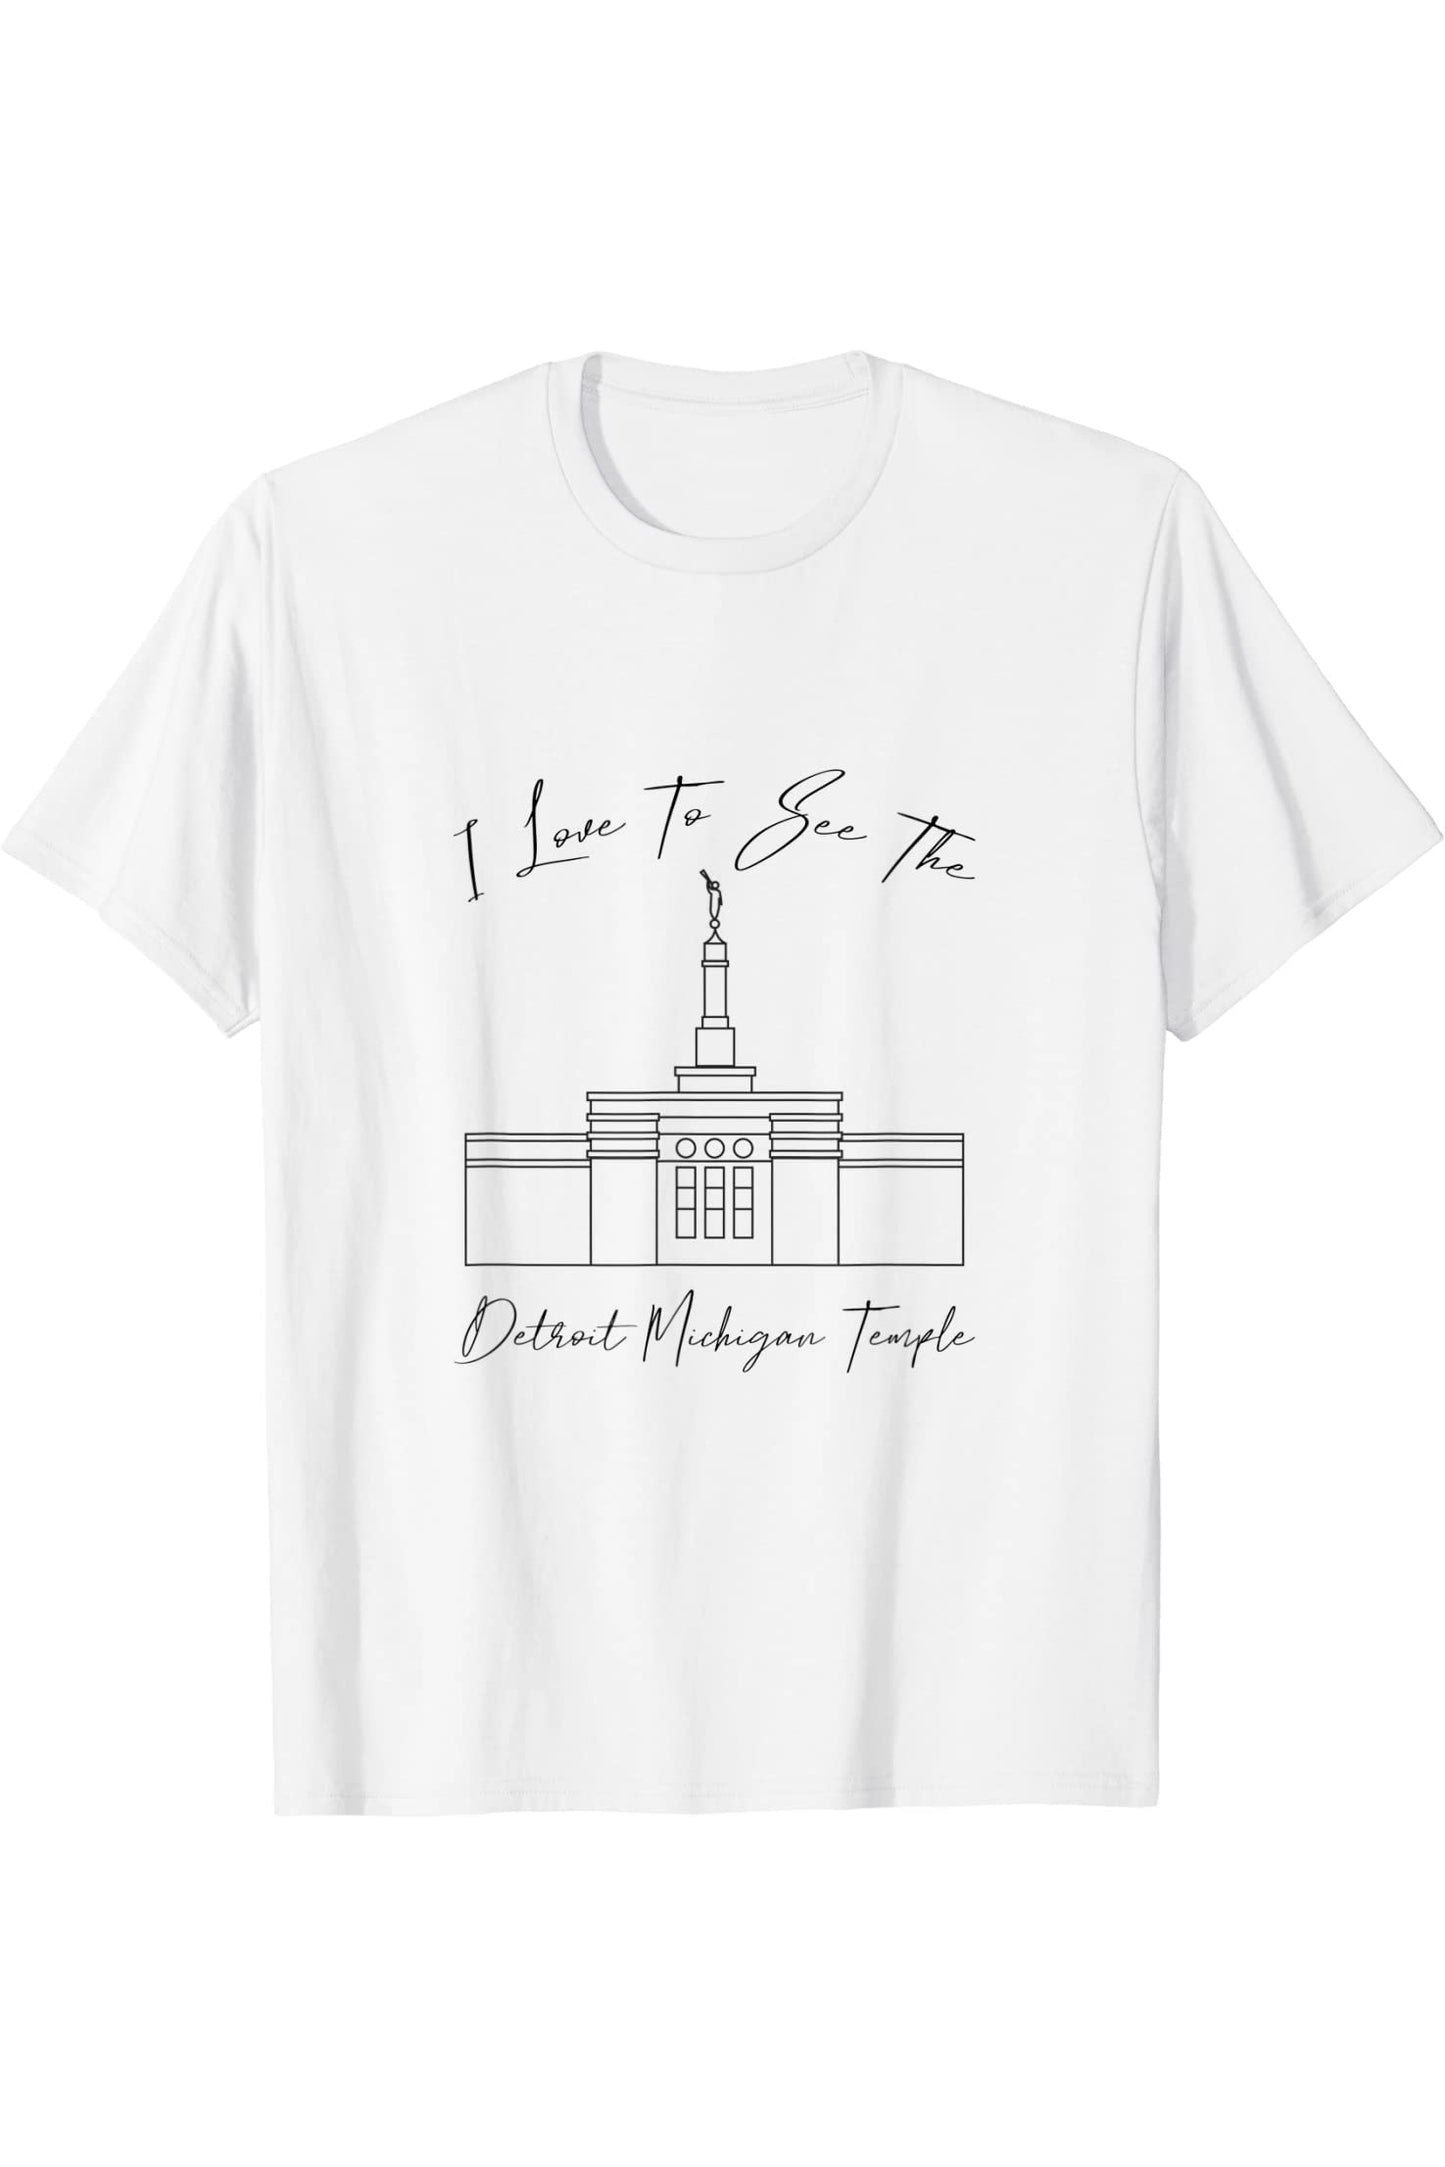 Detroit MI Temple, I love to see my temple, calligraphy T-Shirt